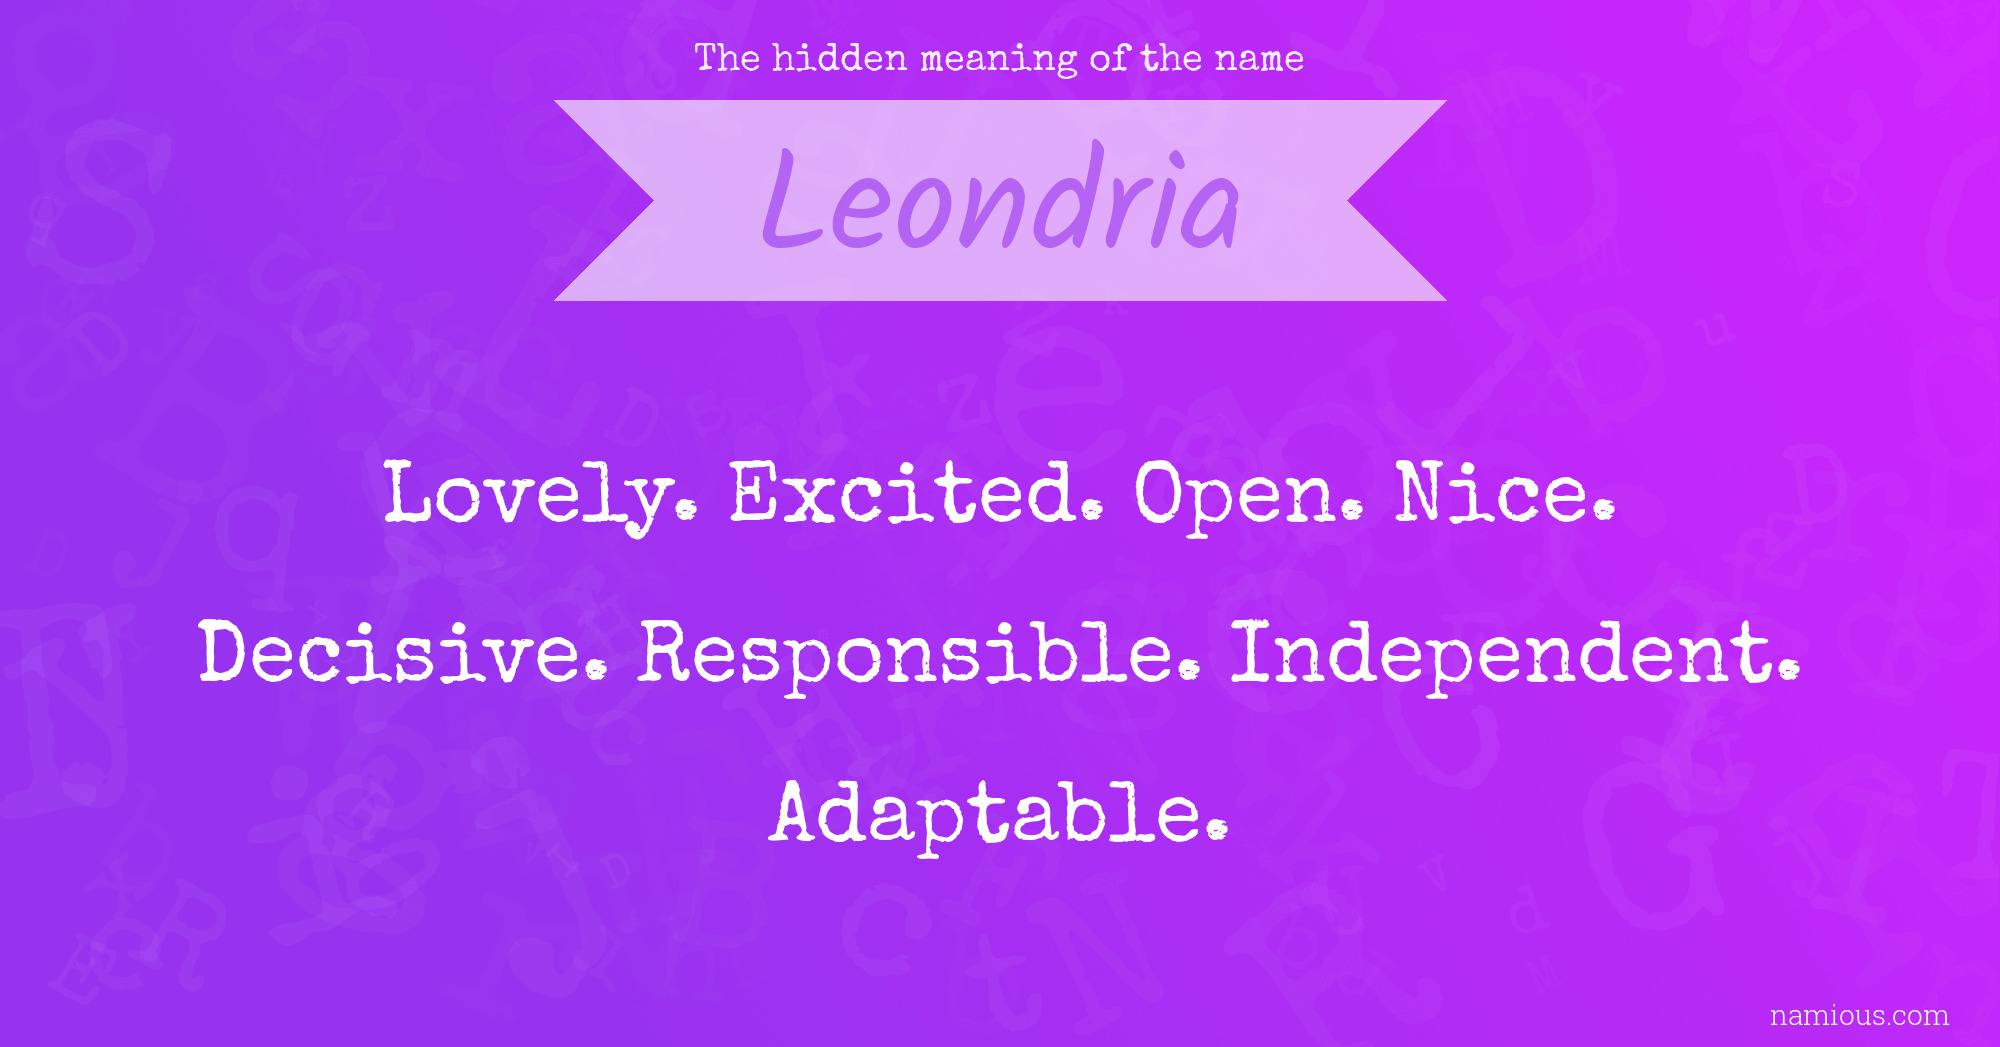 The hidden meaning of the name Leondria